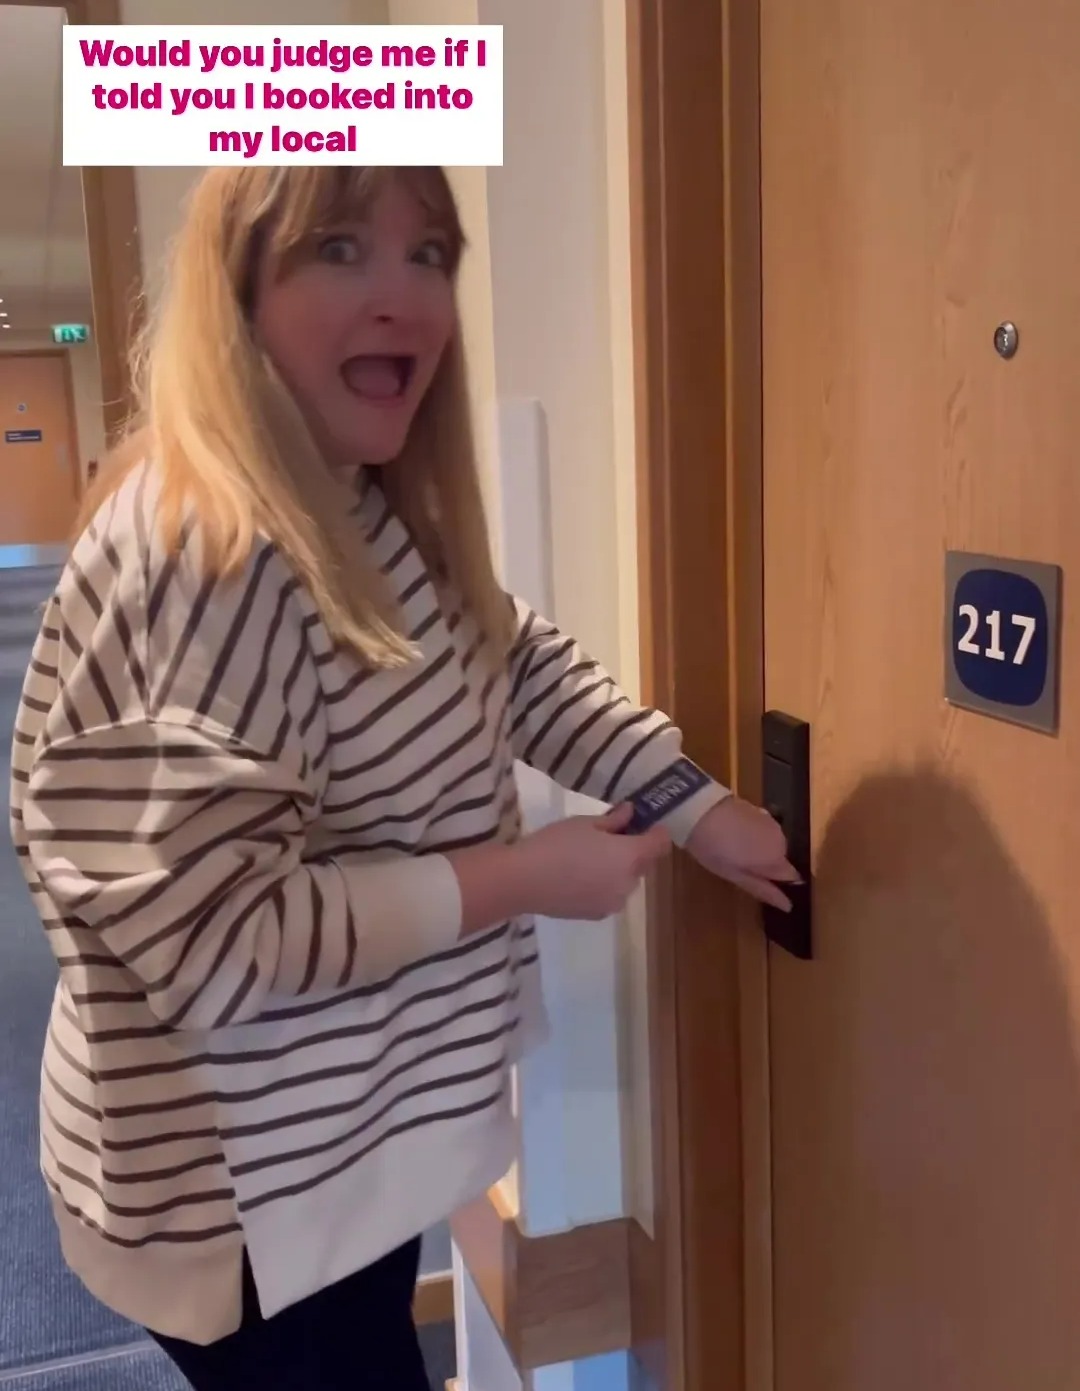 A busy mum has revealed that she recently booked into her local Travelodge to escape her kids for the night